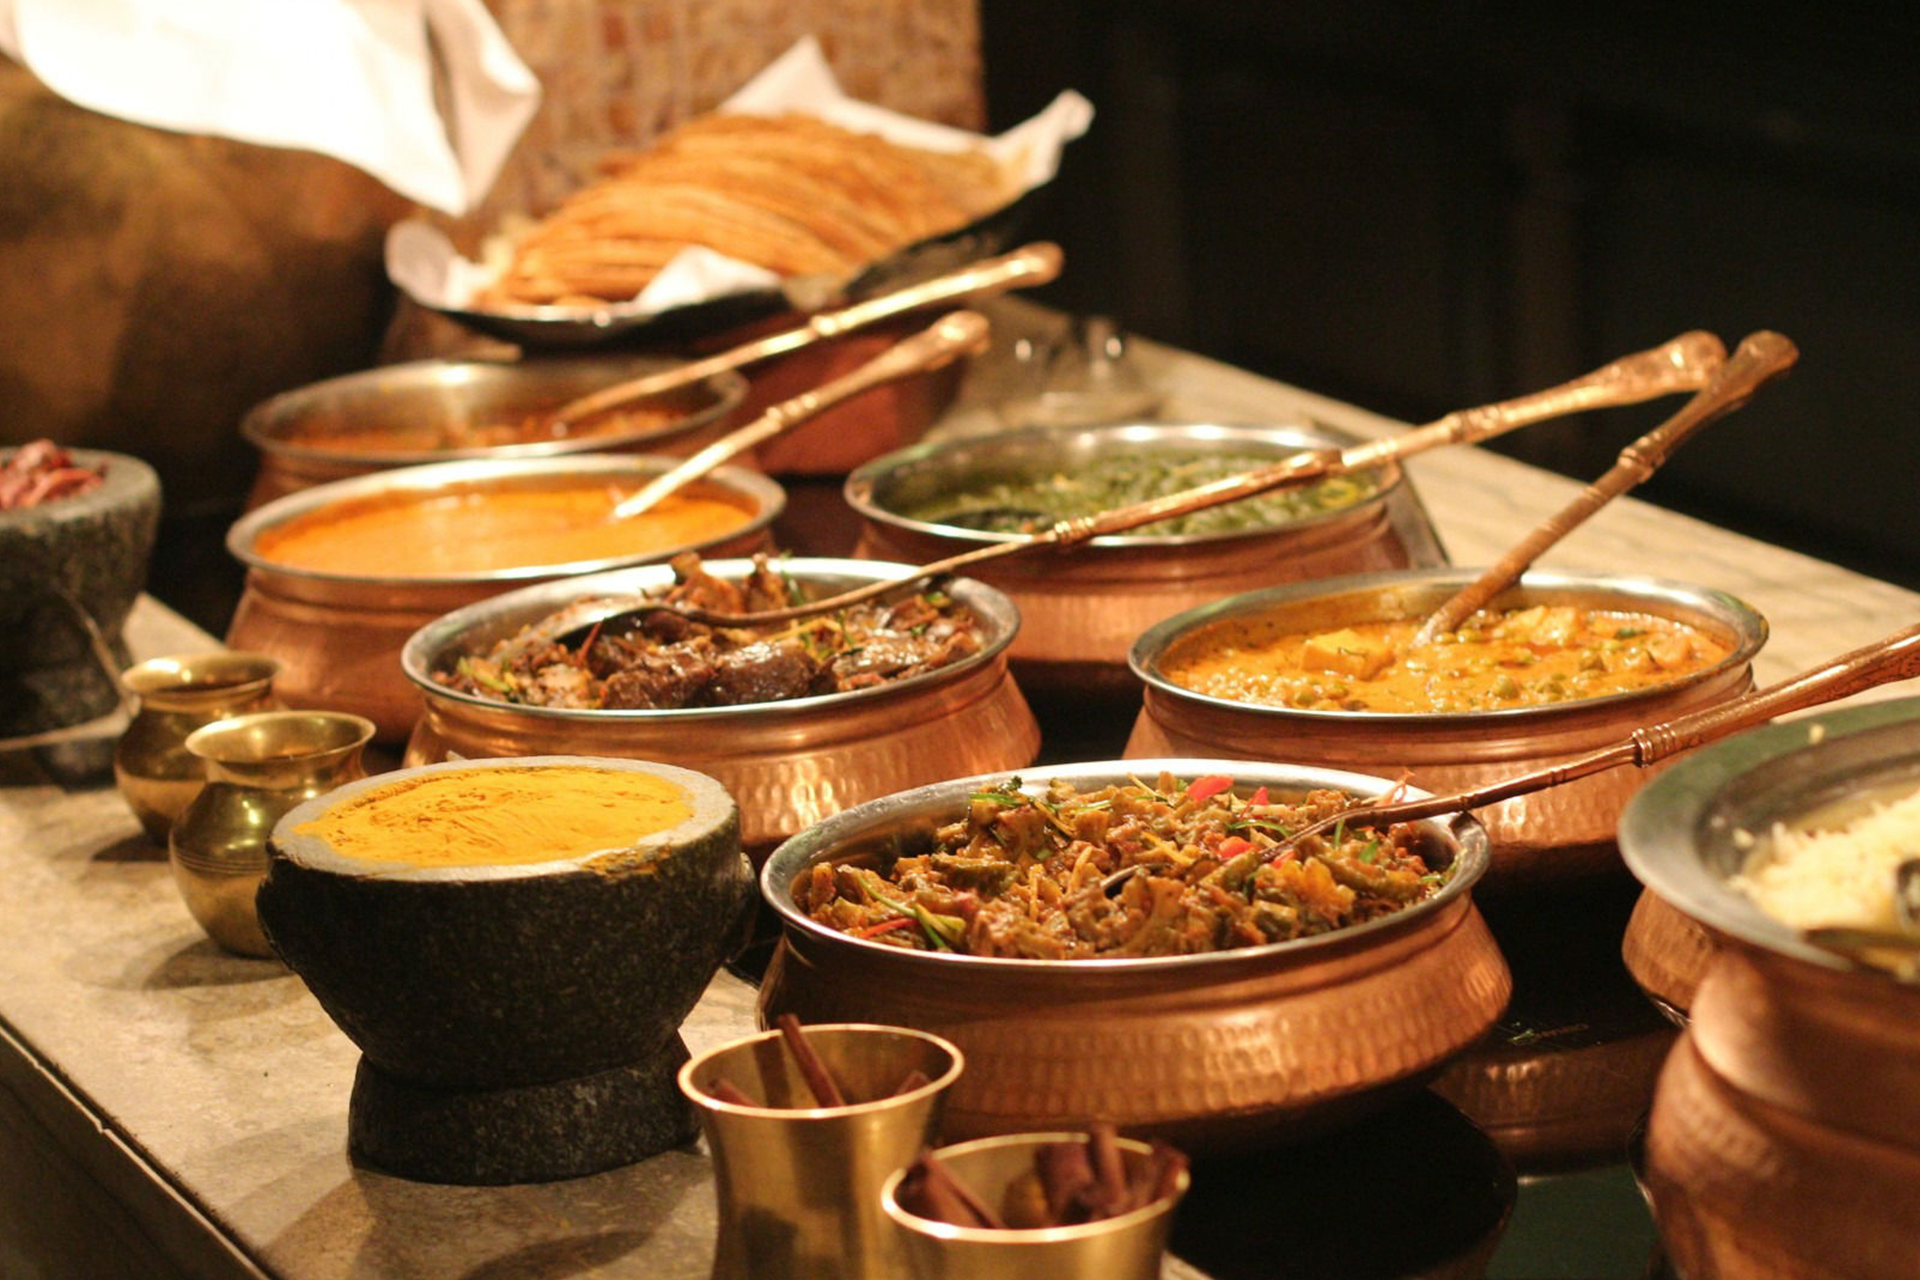 Several Indian food dishes